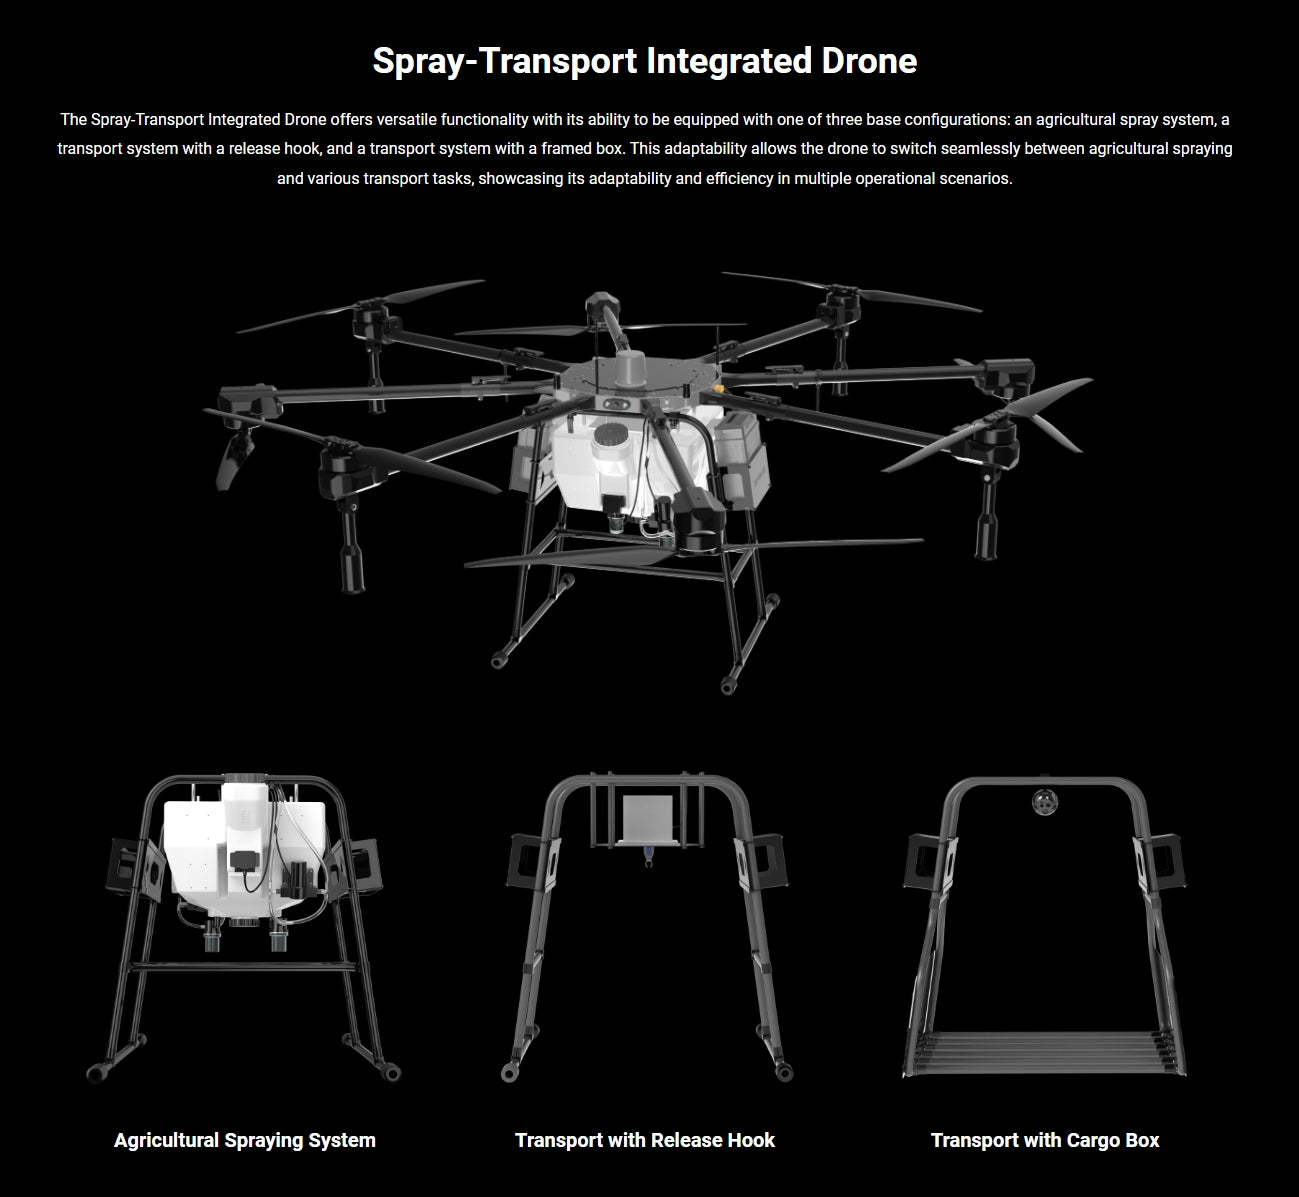 H200 Agricultural / Transport Drone, spray-transport Integrated Drone can switch between agricultural spraying and transport tasks .